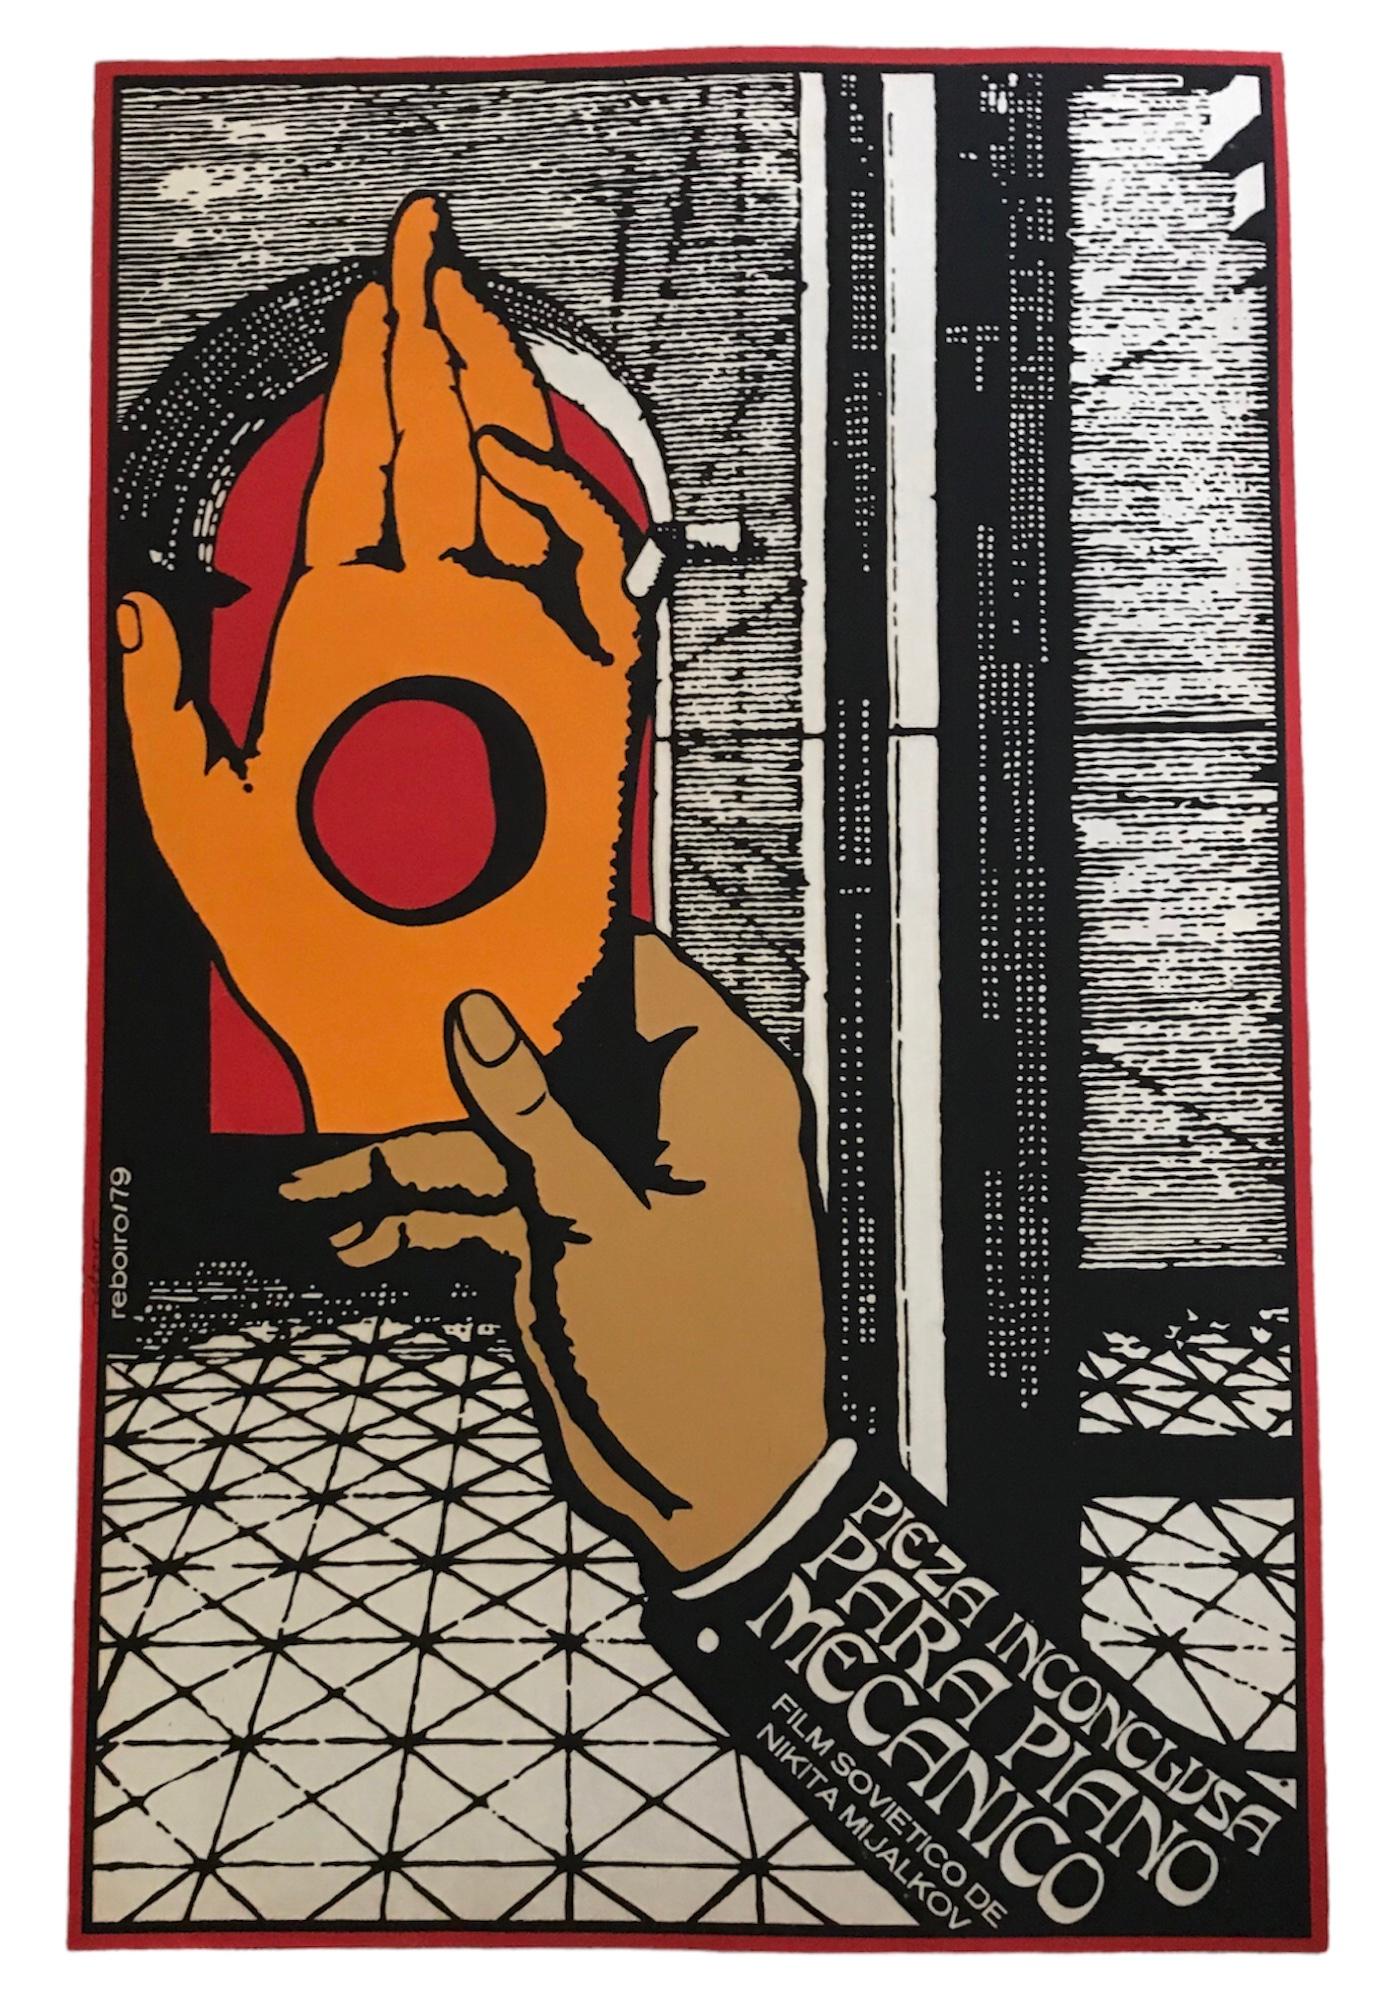 1979 Cuban Silkscreen Poster for Soviet Film Pieza Inconclusa by Russian Director and Actor Nikita Mijalkov (b.1945).   Surrealist silkscreen art work by  Antonio Fernández Reboiro. Reminiscent of Rene Magrite, it depicts an arm holding a hand with